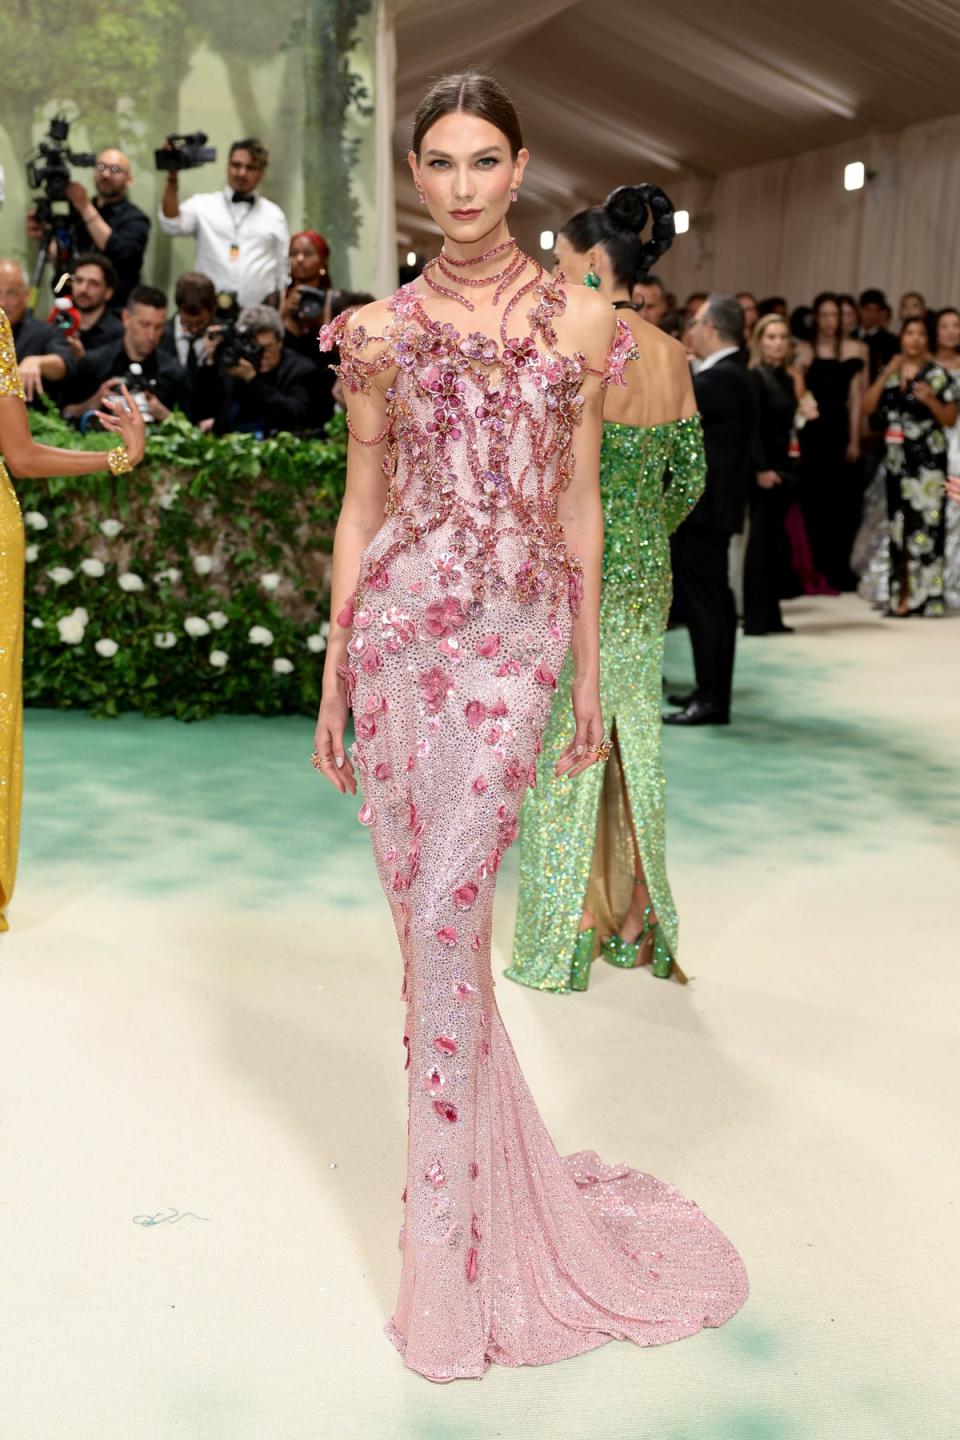 Karlie Kloss in Swarovski  (Getty Images for The Met Museum/)